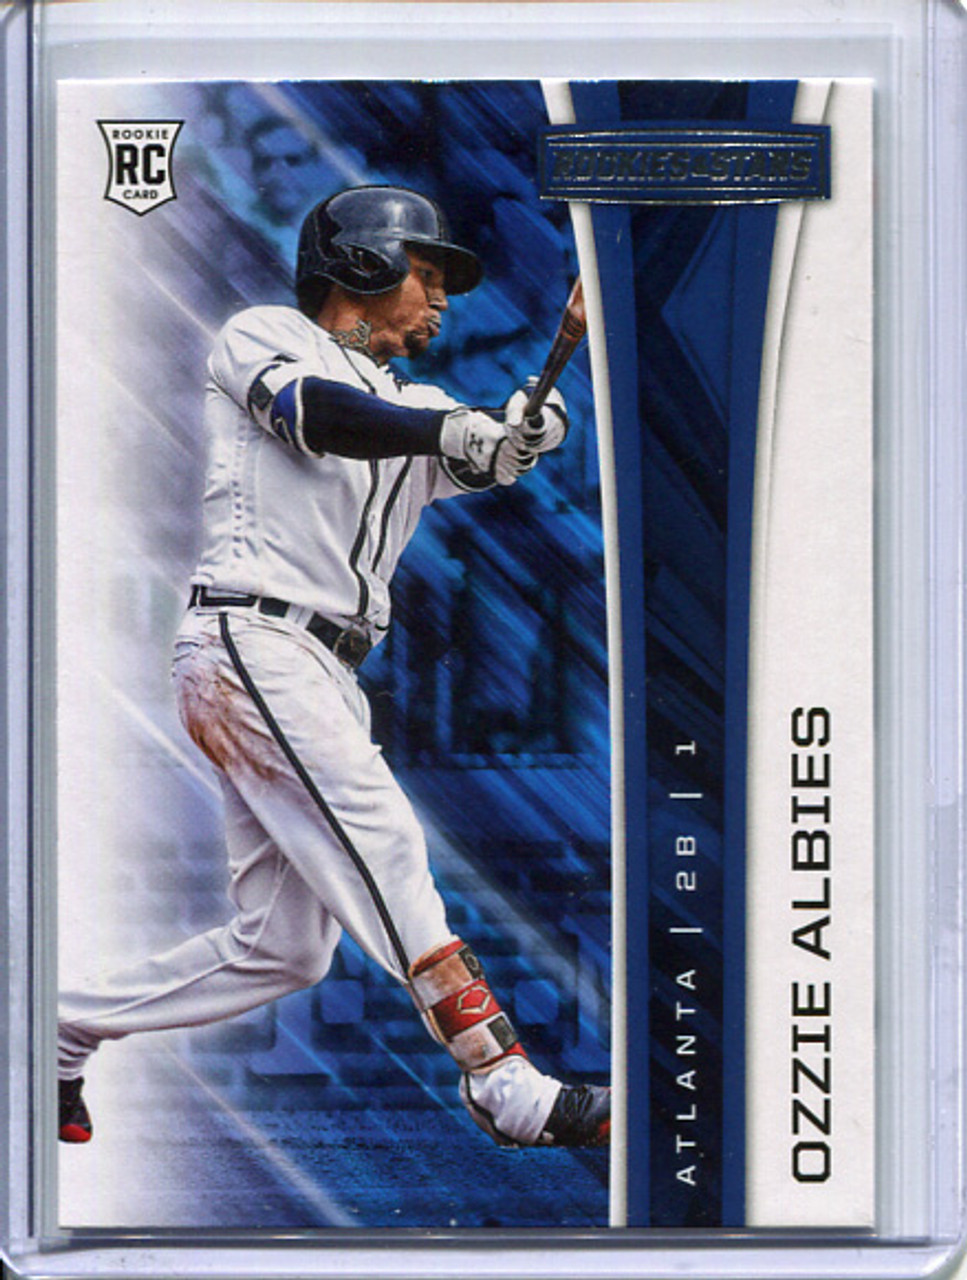 Ozzie Albies 2018 Chronicles, Rookies & Stars #8